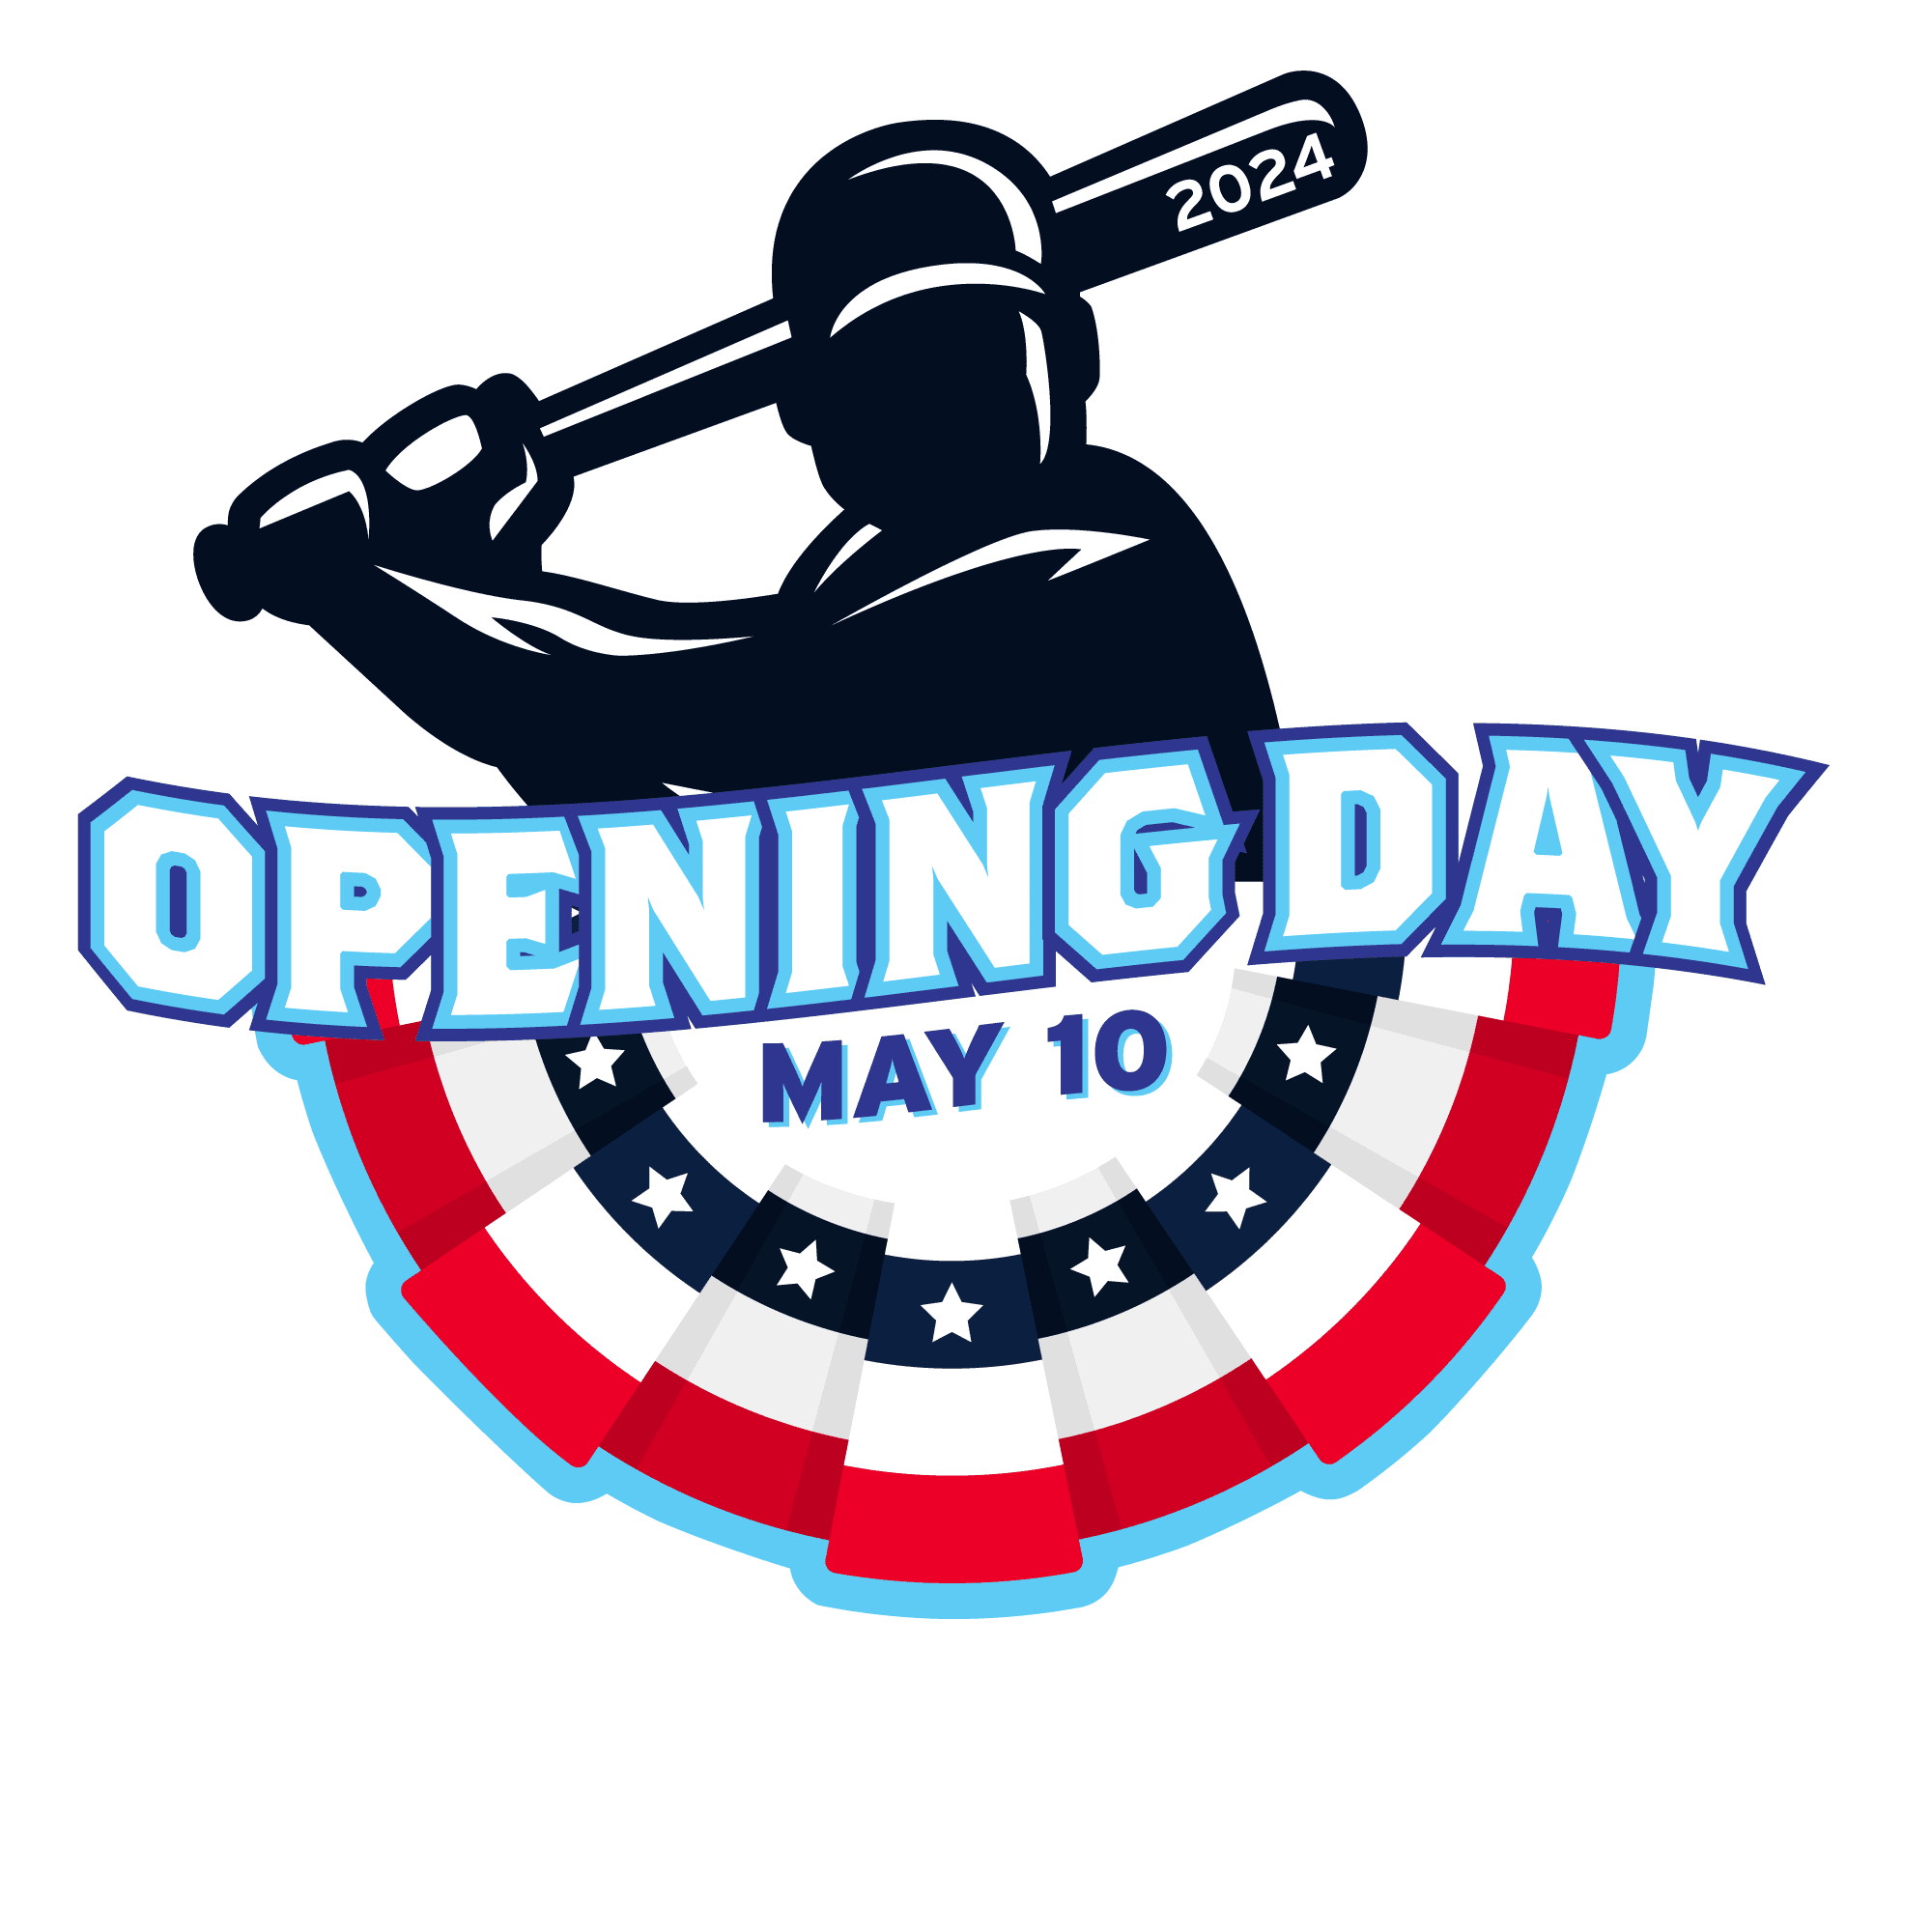 Opening Day, May 10